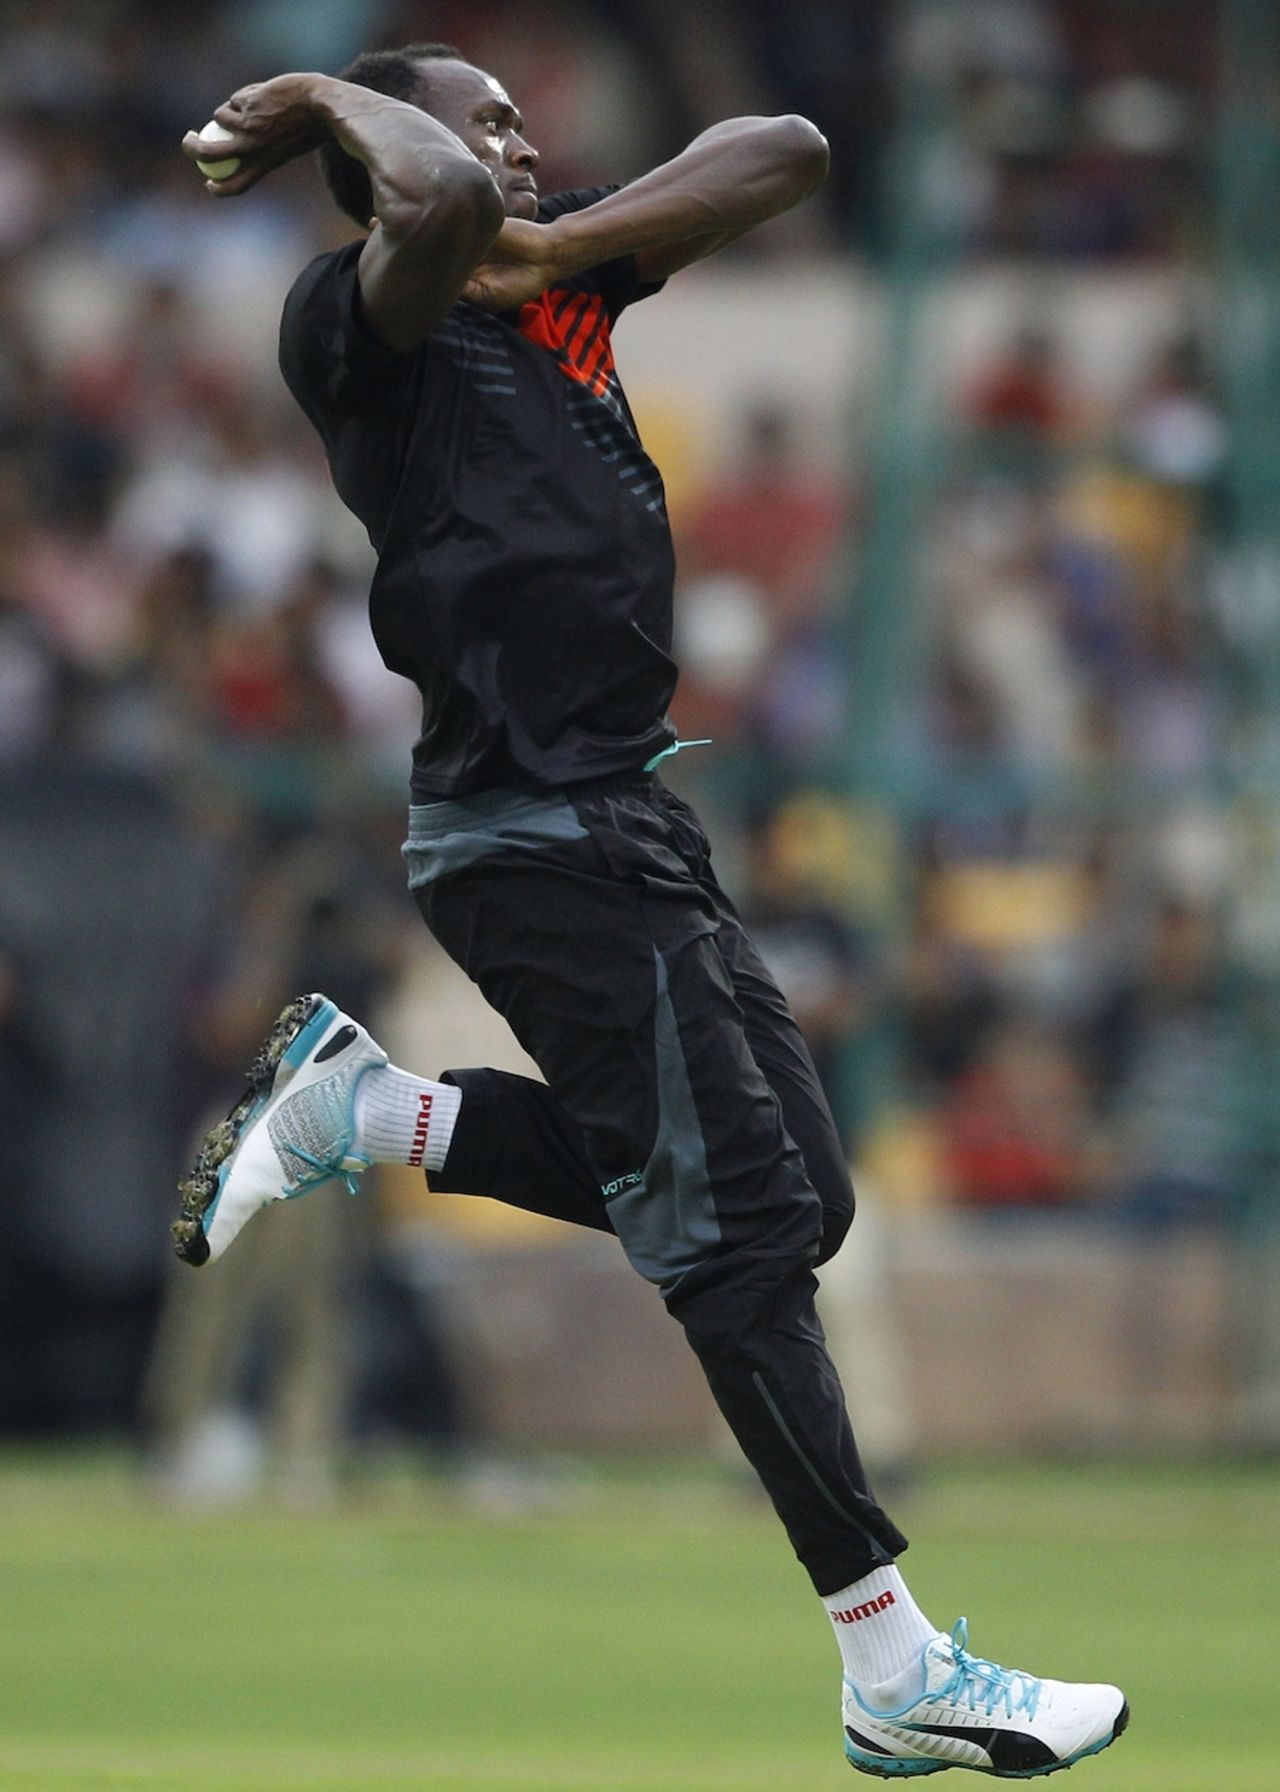 Usain Bolt in his delivery stride, Bangalore, September 2, 2014